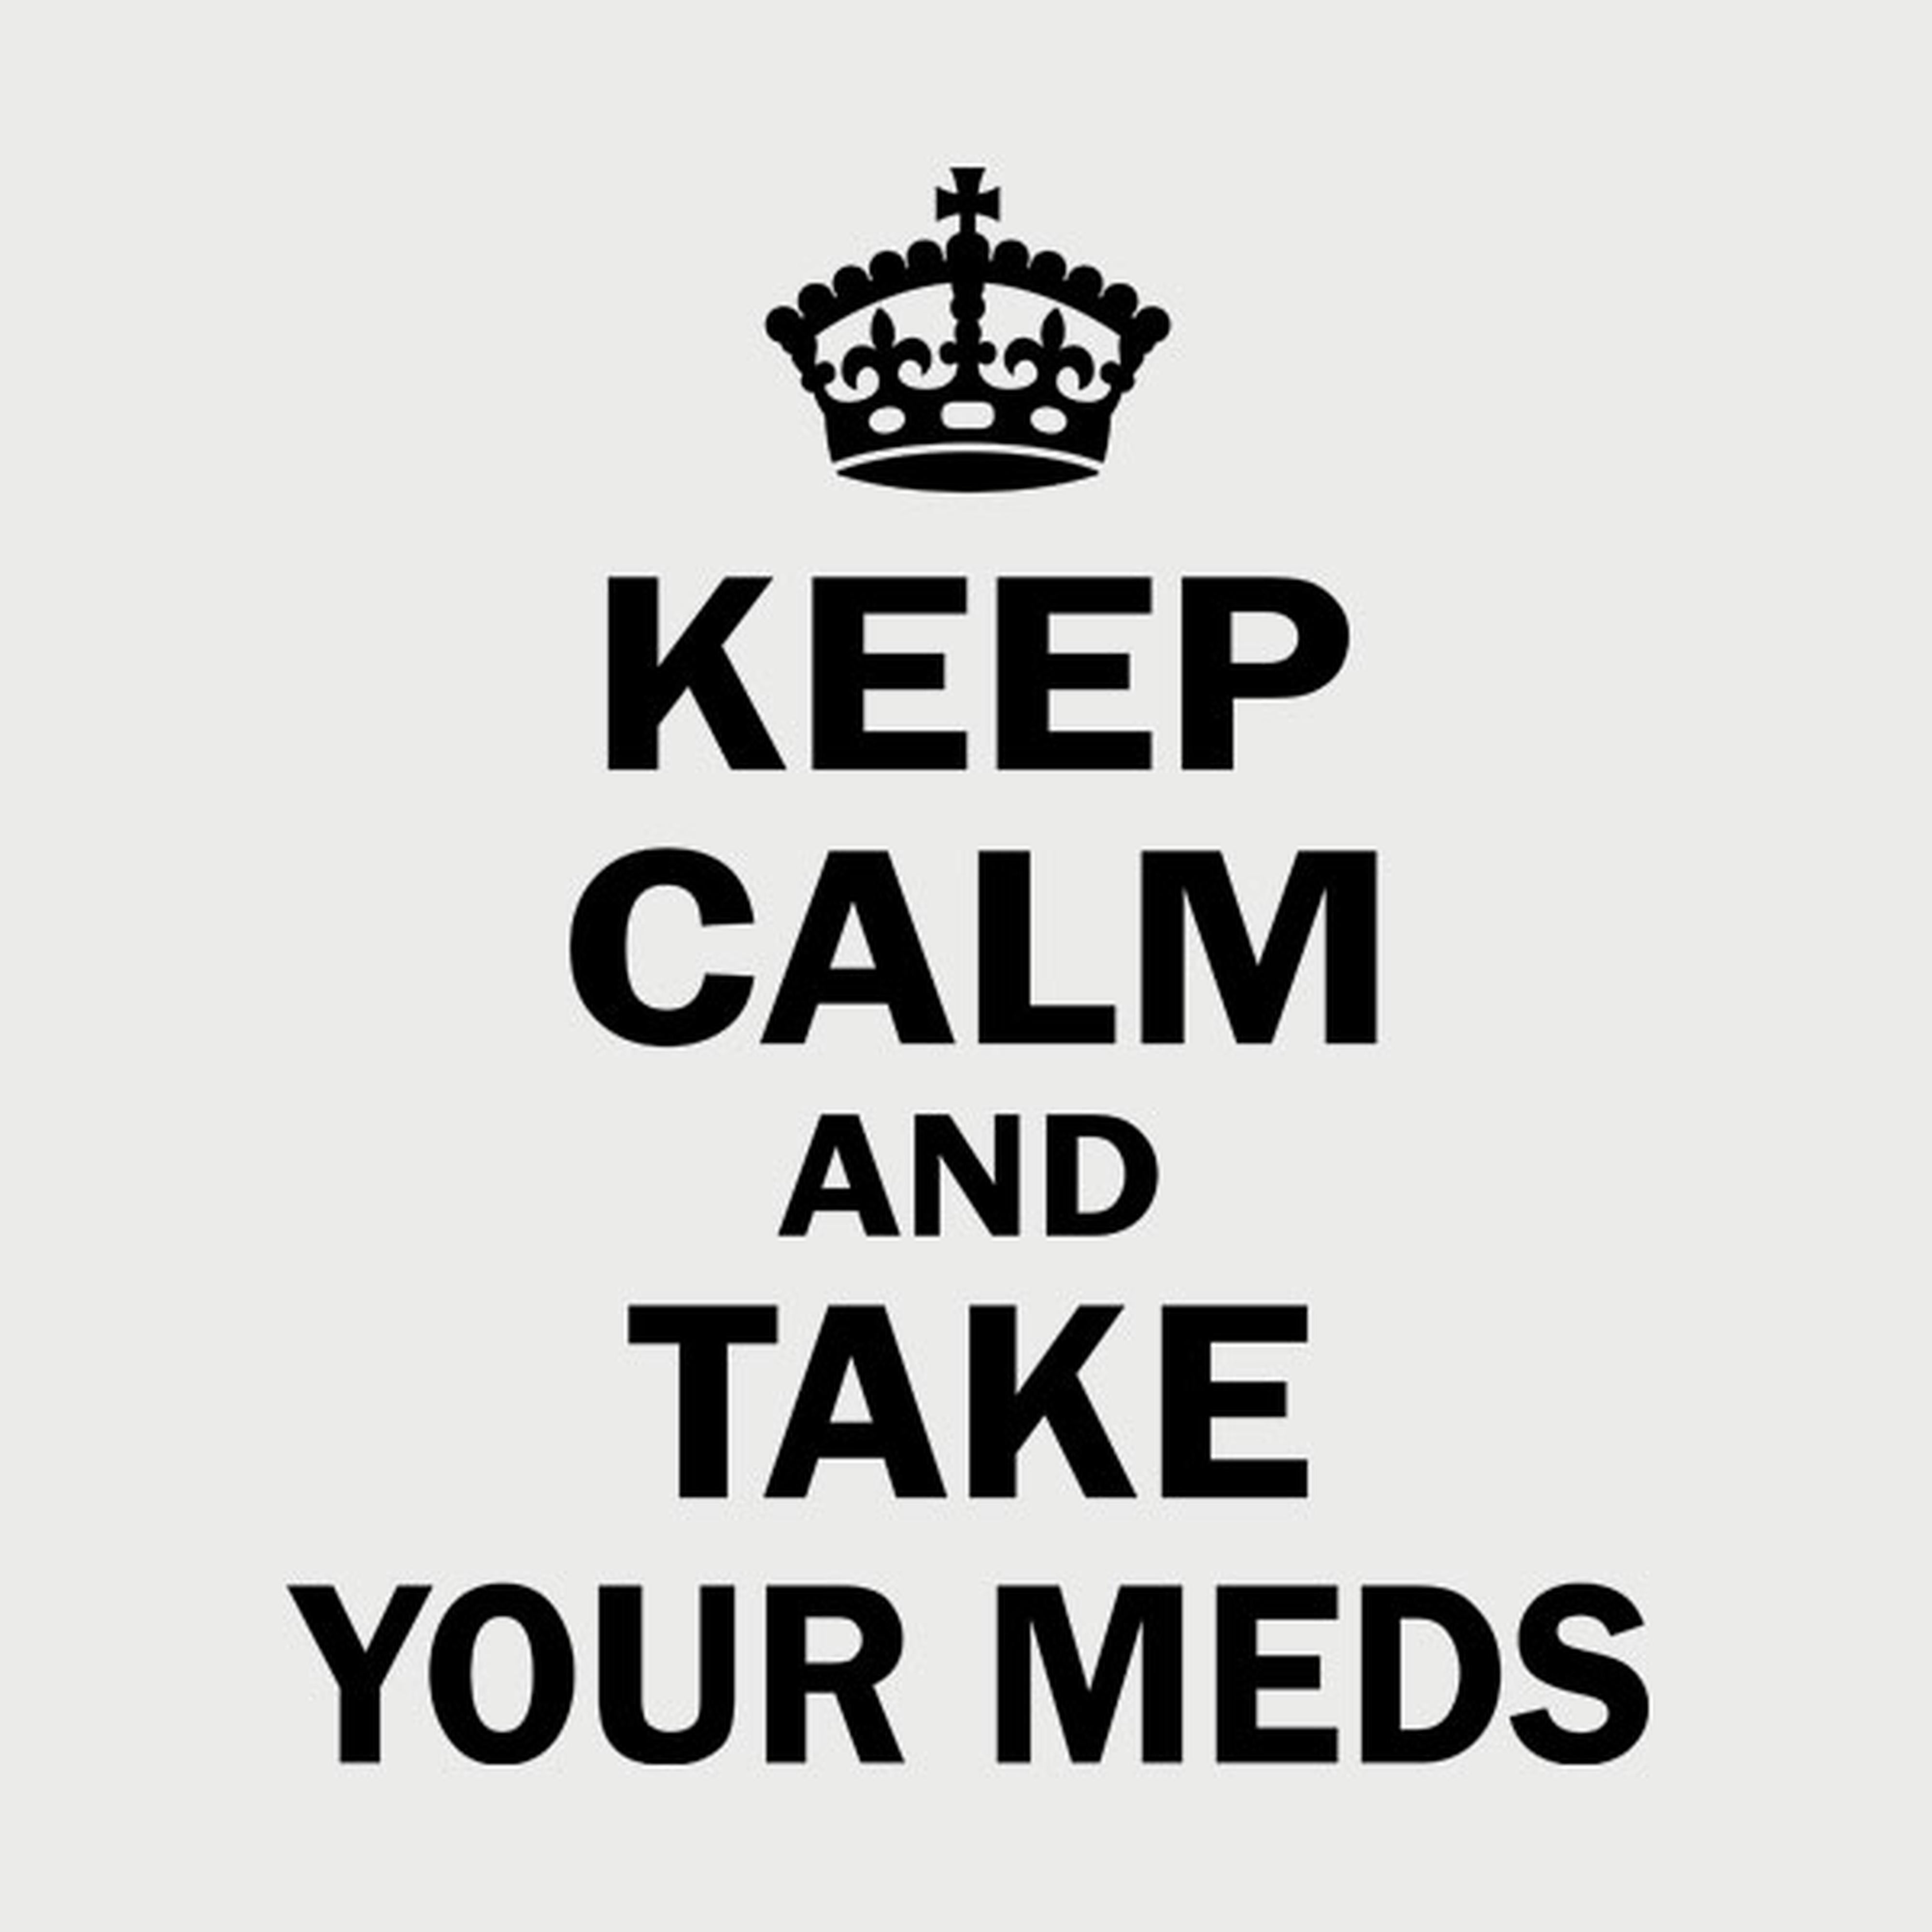 Keep calm and take your meds - T-shirt